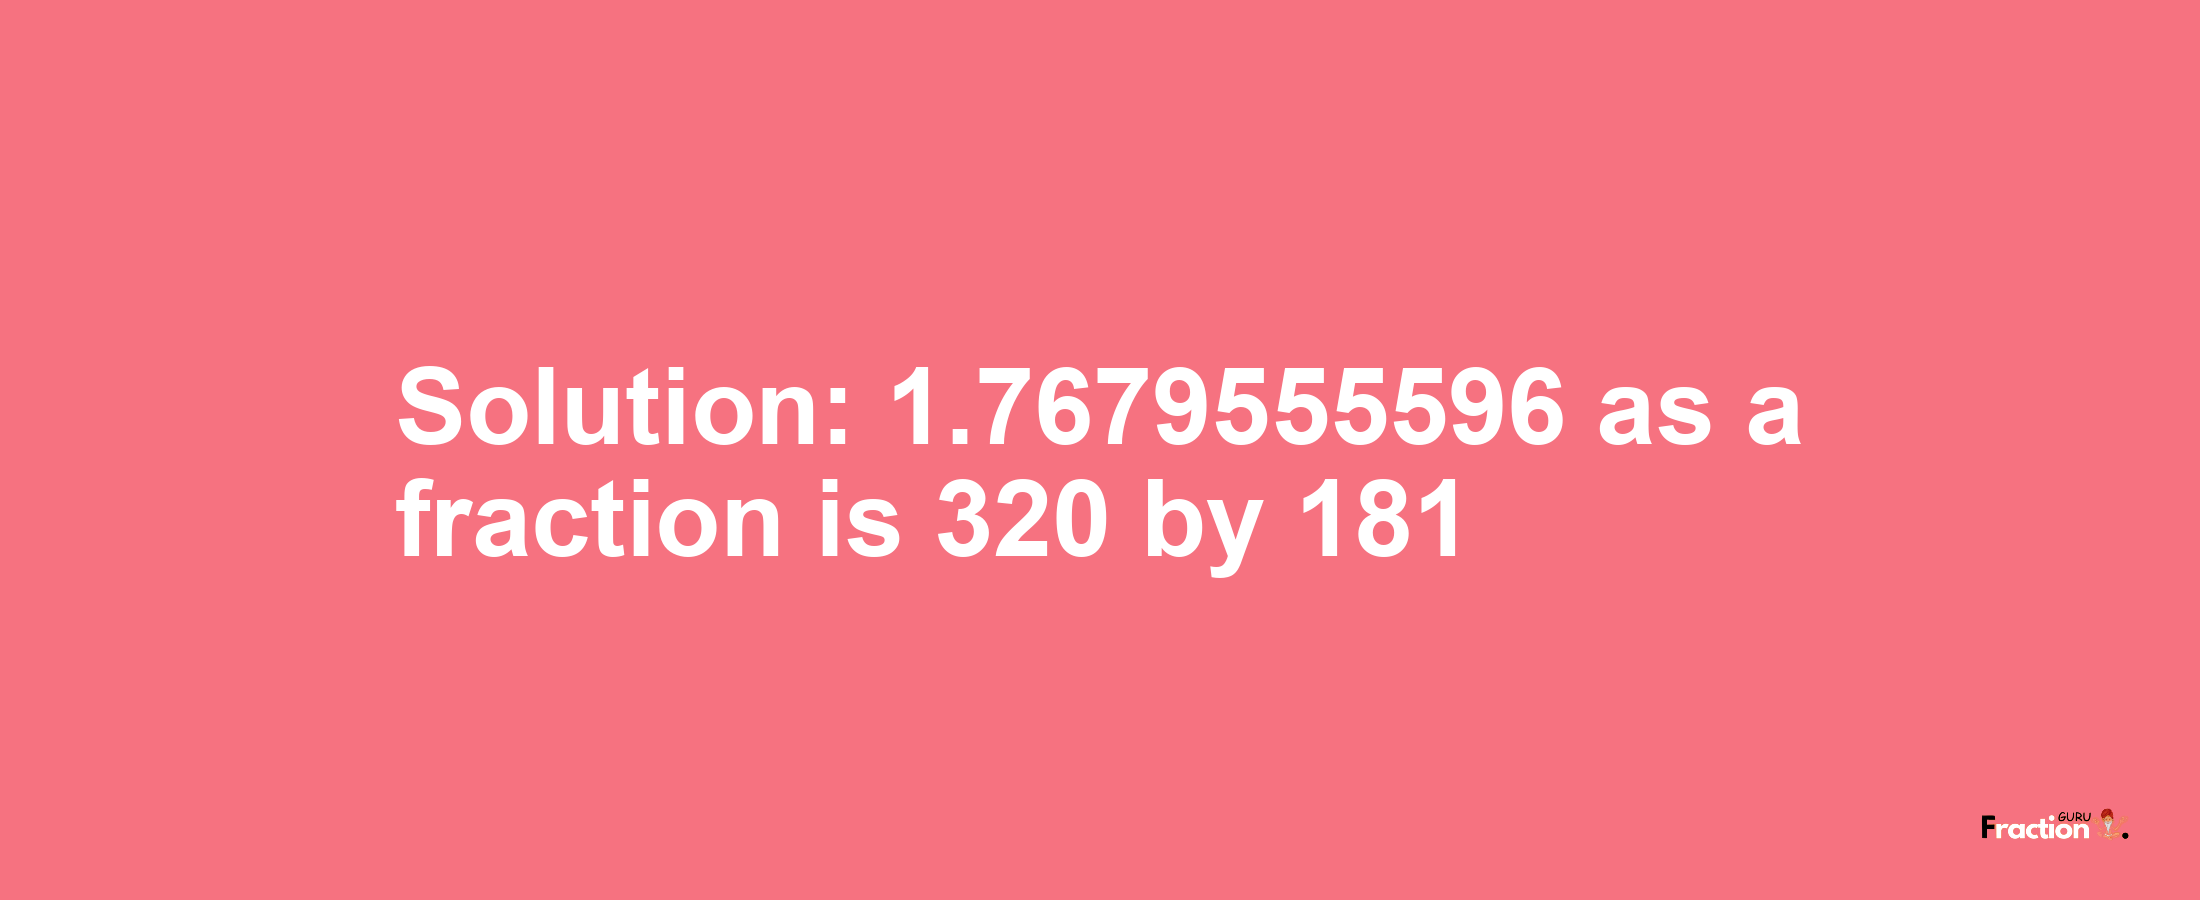 Solution:1.7679555596 as a fraction is 320/181